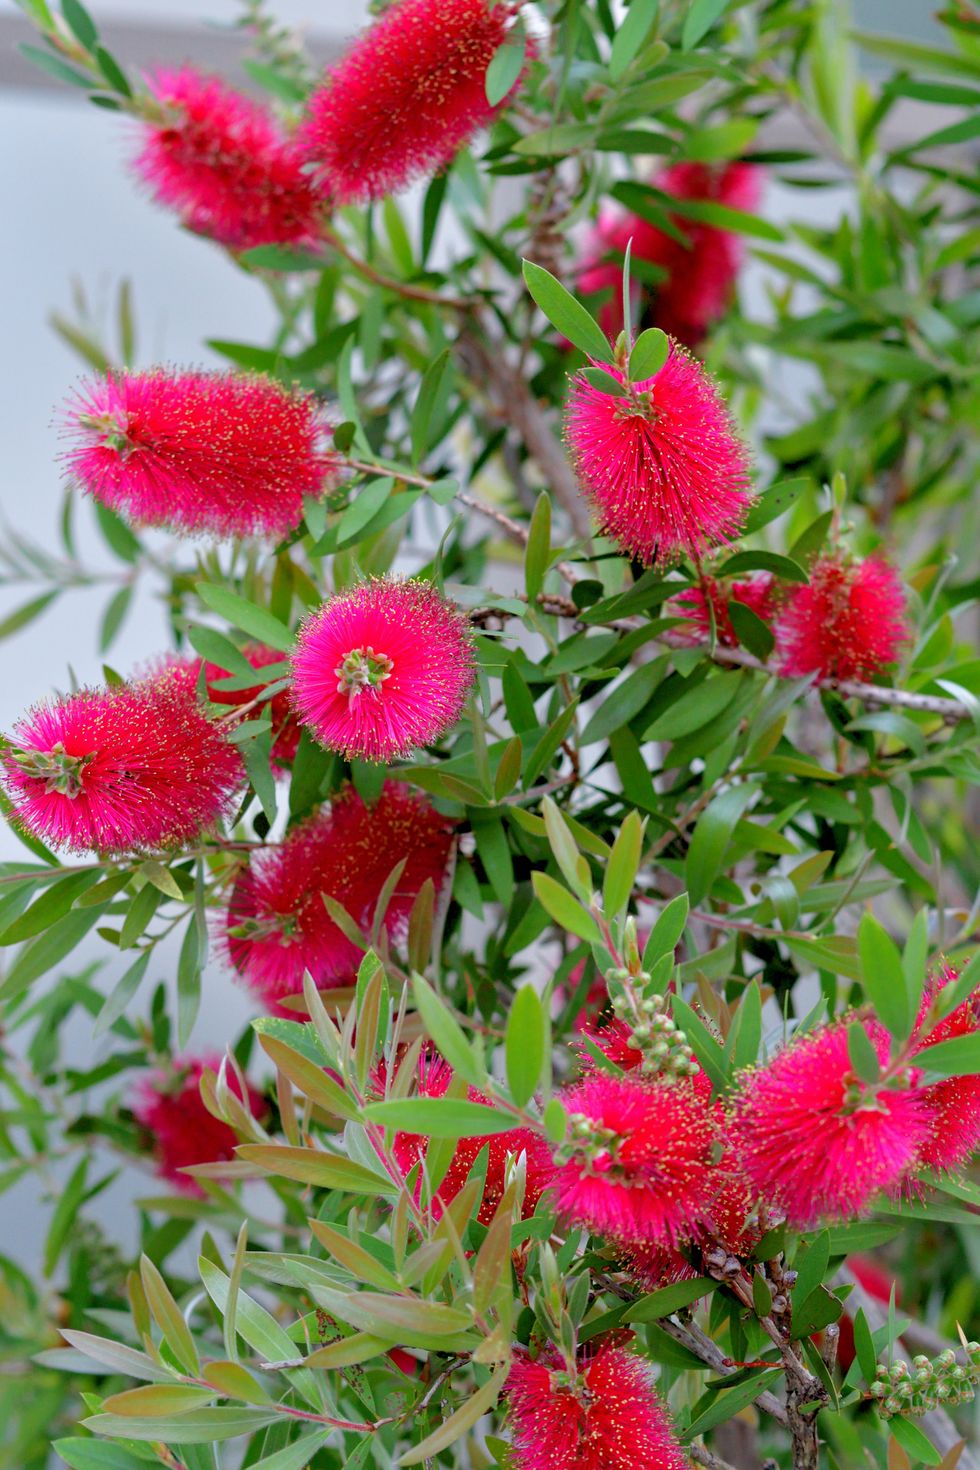 callistemon belongs to the family of myrtaceae and commonly called bottlebrush because of its cylindrical, brush like flowers, which resemble a traditional bottle brushes the obvious parts of the flower masses are stamens, with the pollen at the top of the filament the color of the flowers is mostly red, but it varies with species, including white, yellow and orange the blooming time is may and june